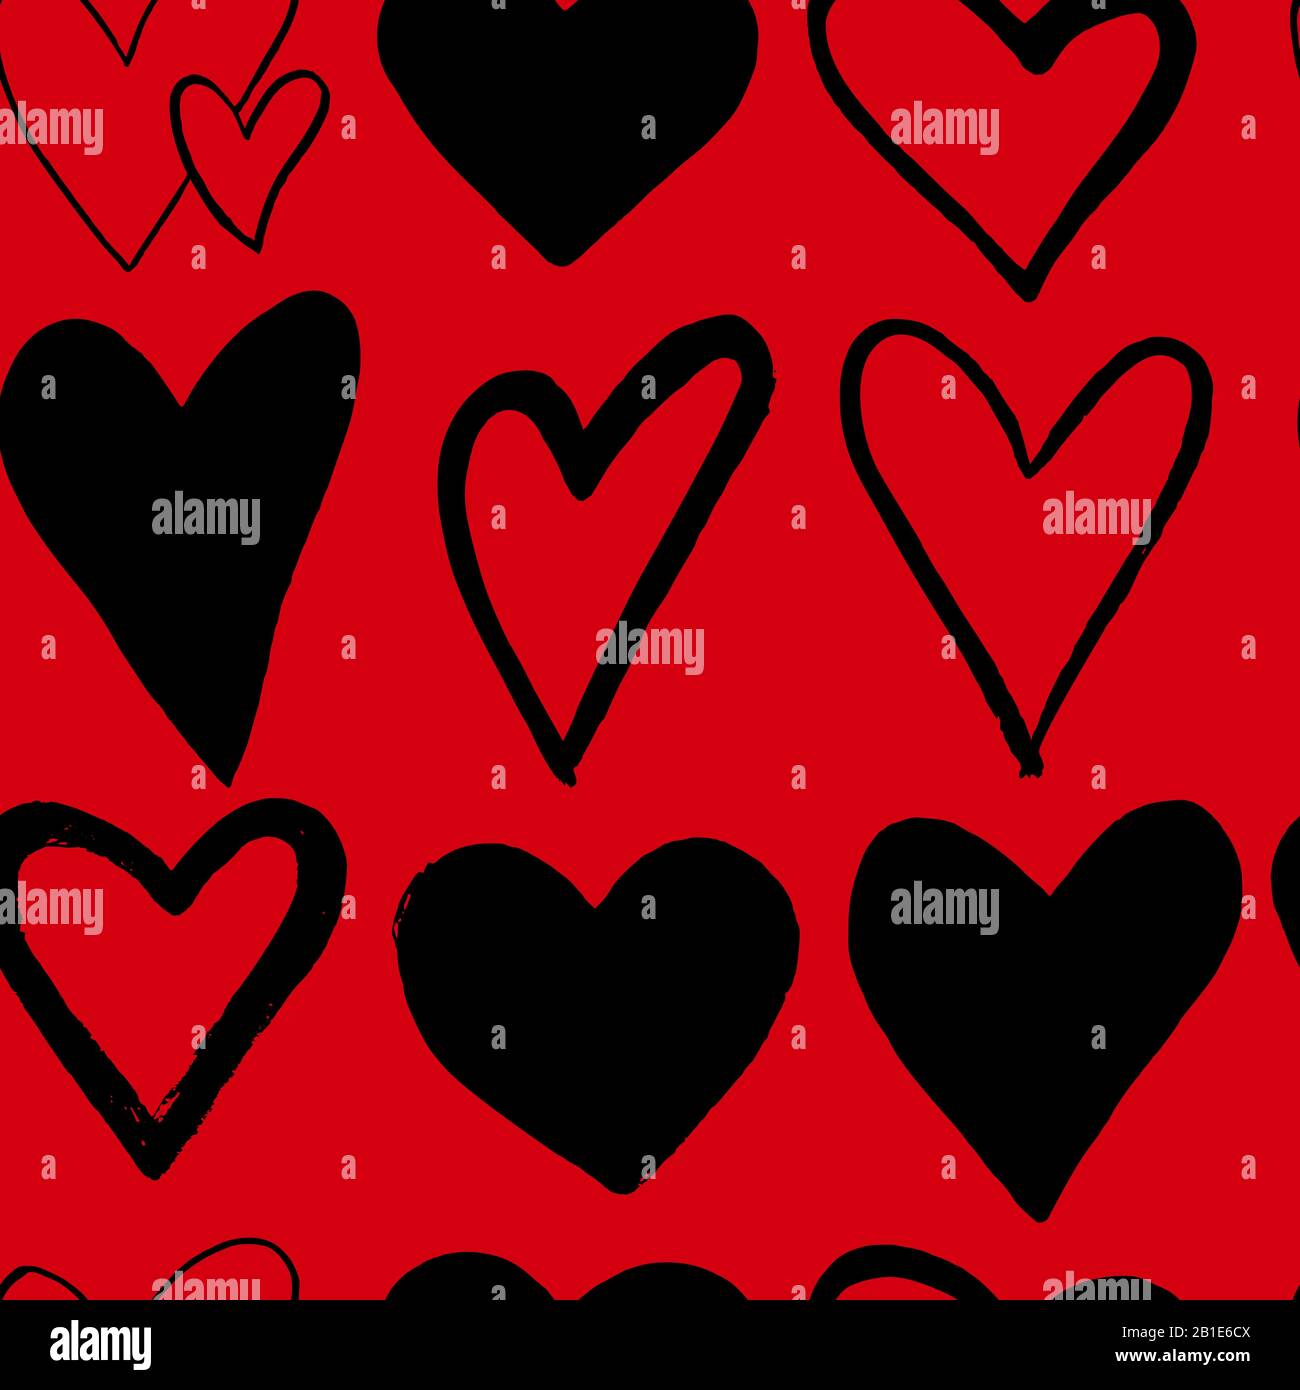 Hand drawn seamless pattern with red hearts on - Stock